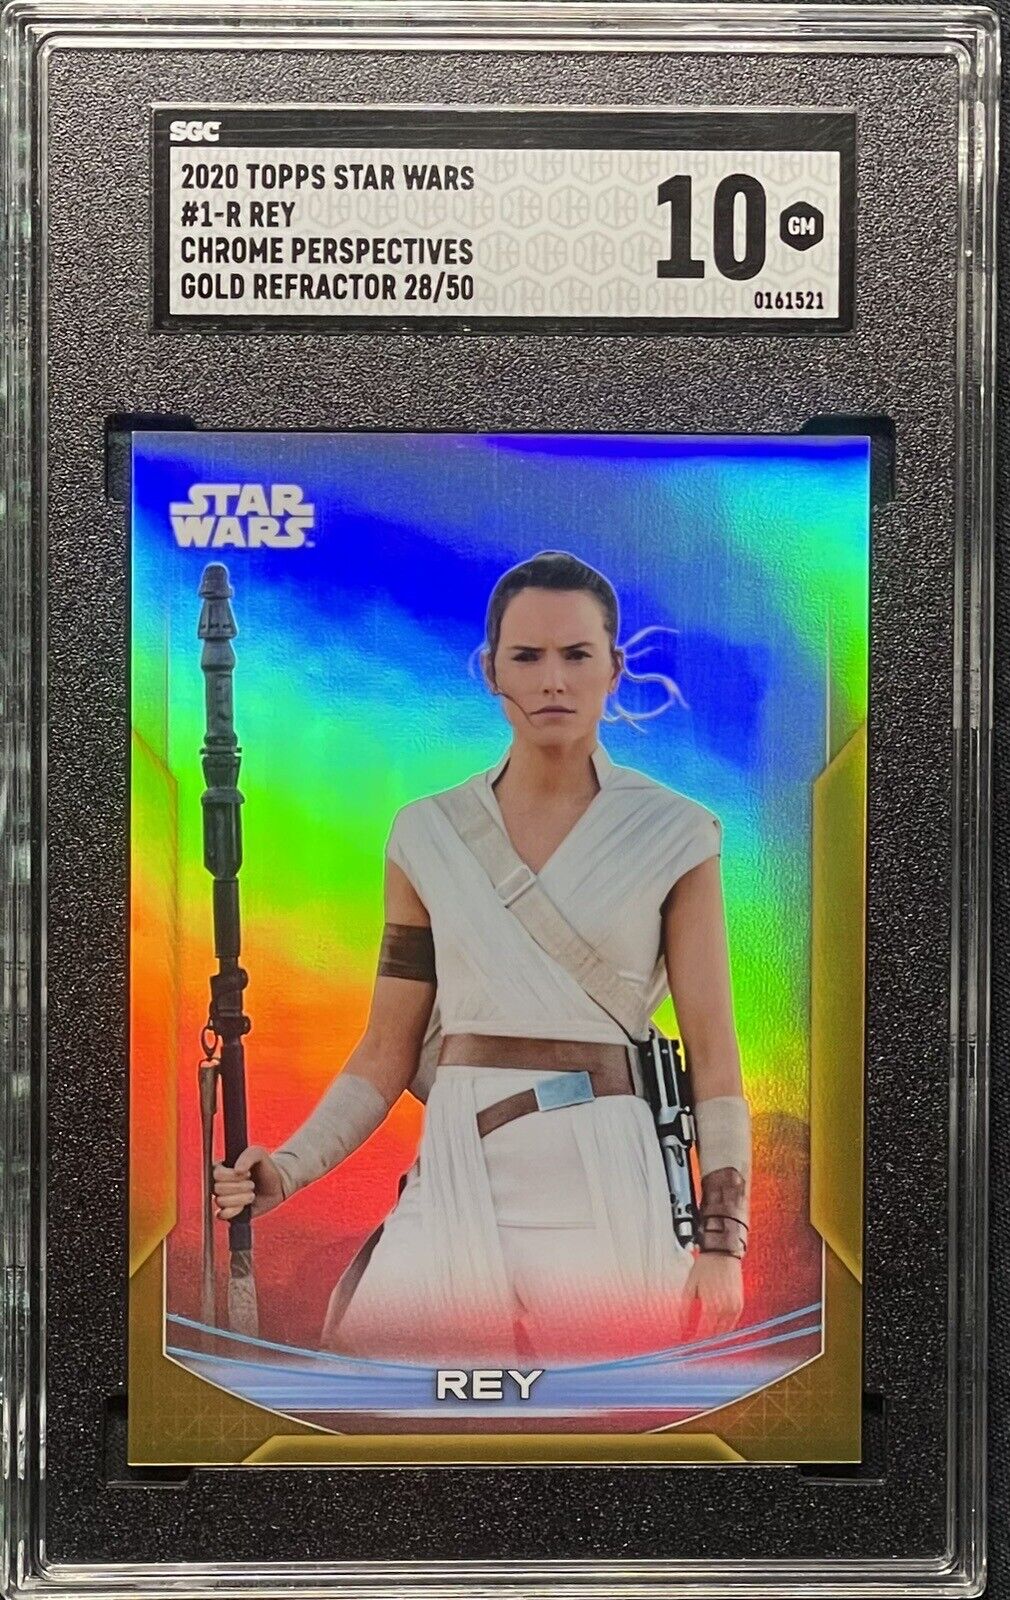 2020 Topps Star Wars Chrome Perspectives #1-R Rey Gold Refractor /50 SGC 10